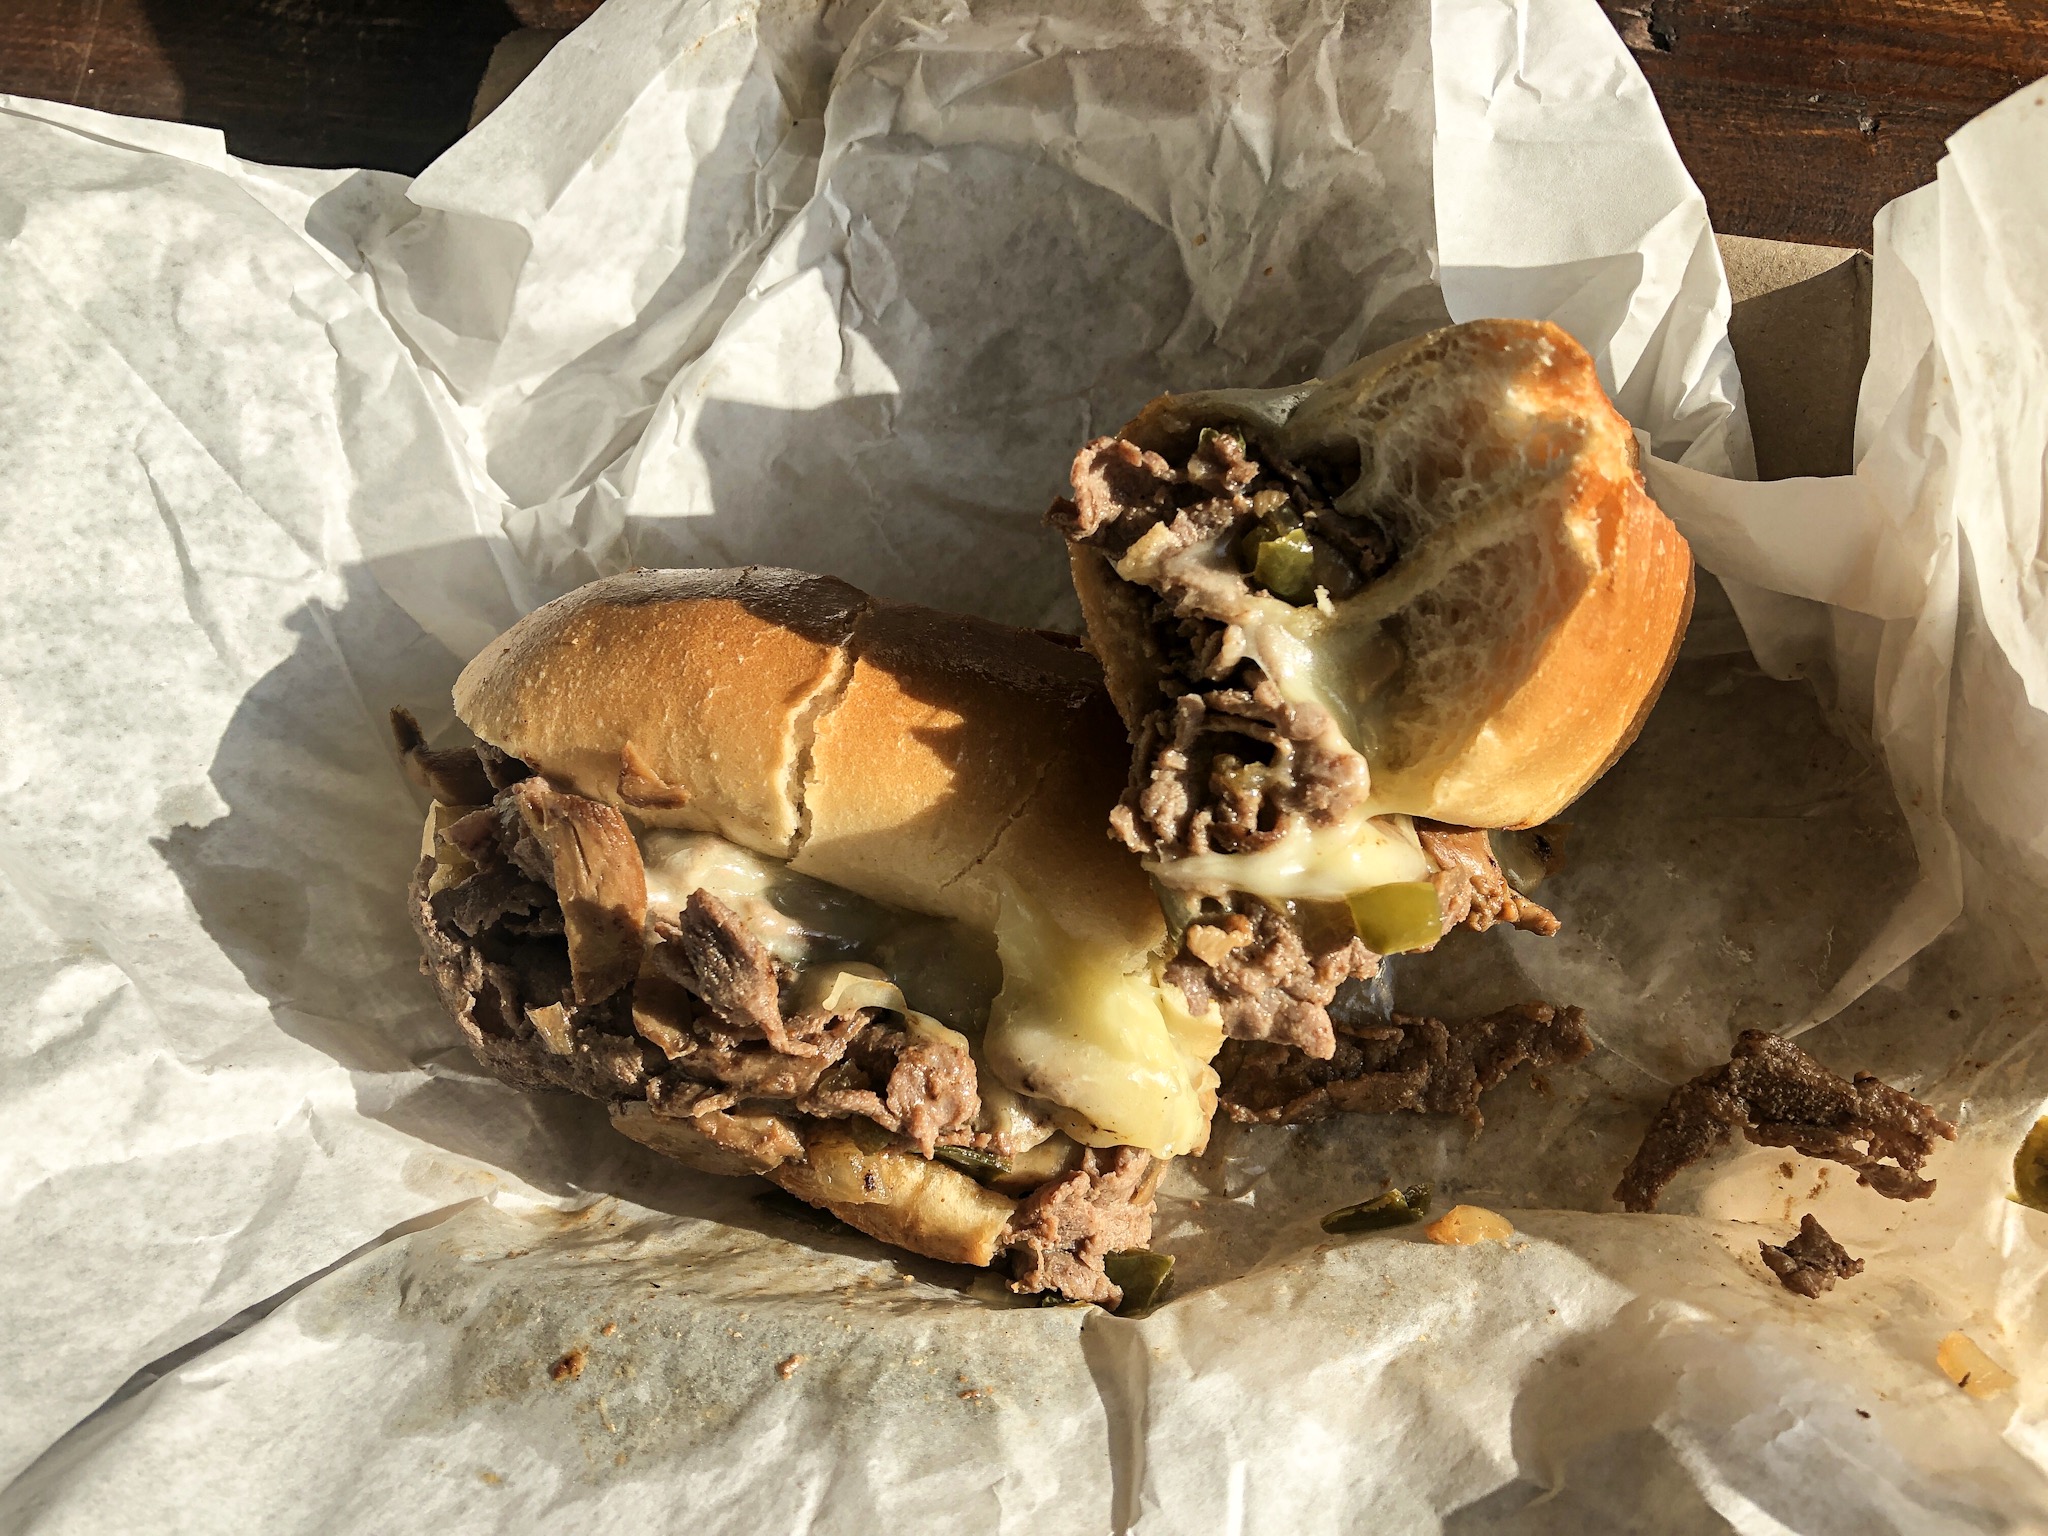 Cheesesteak Sandwich with the works from the Dairy Inn